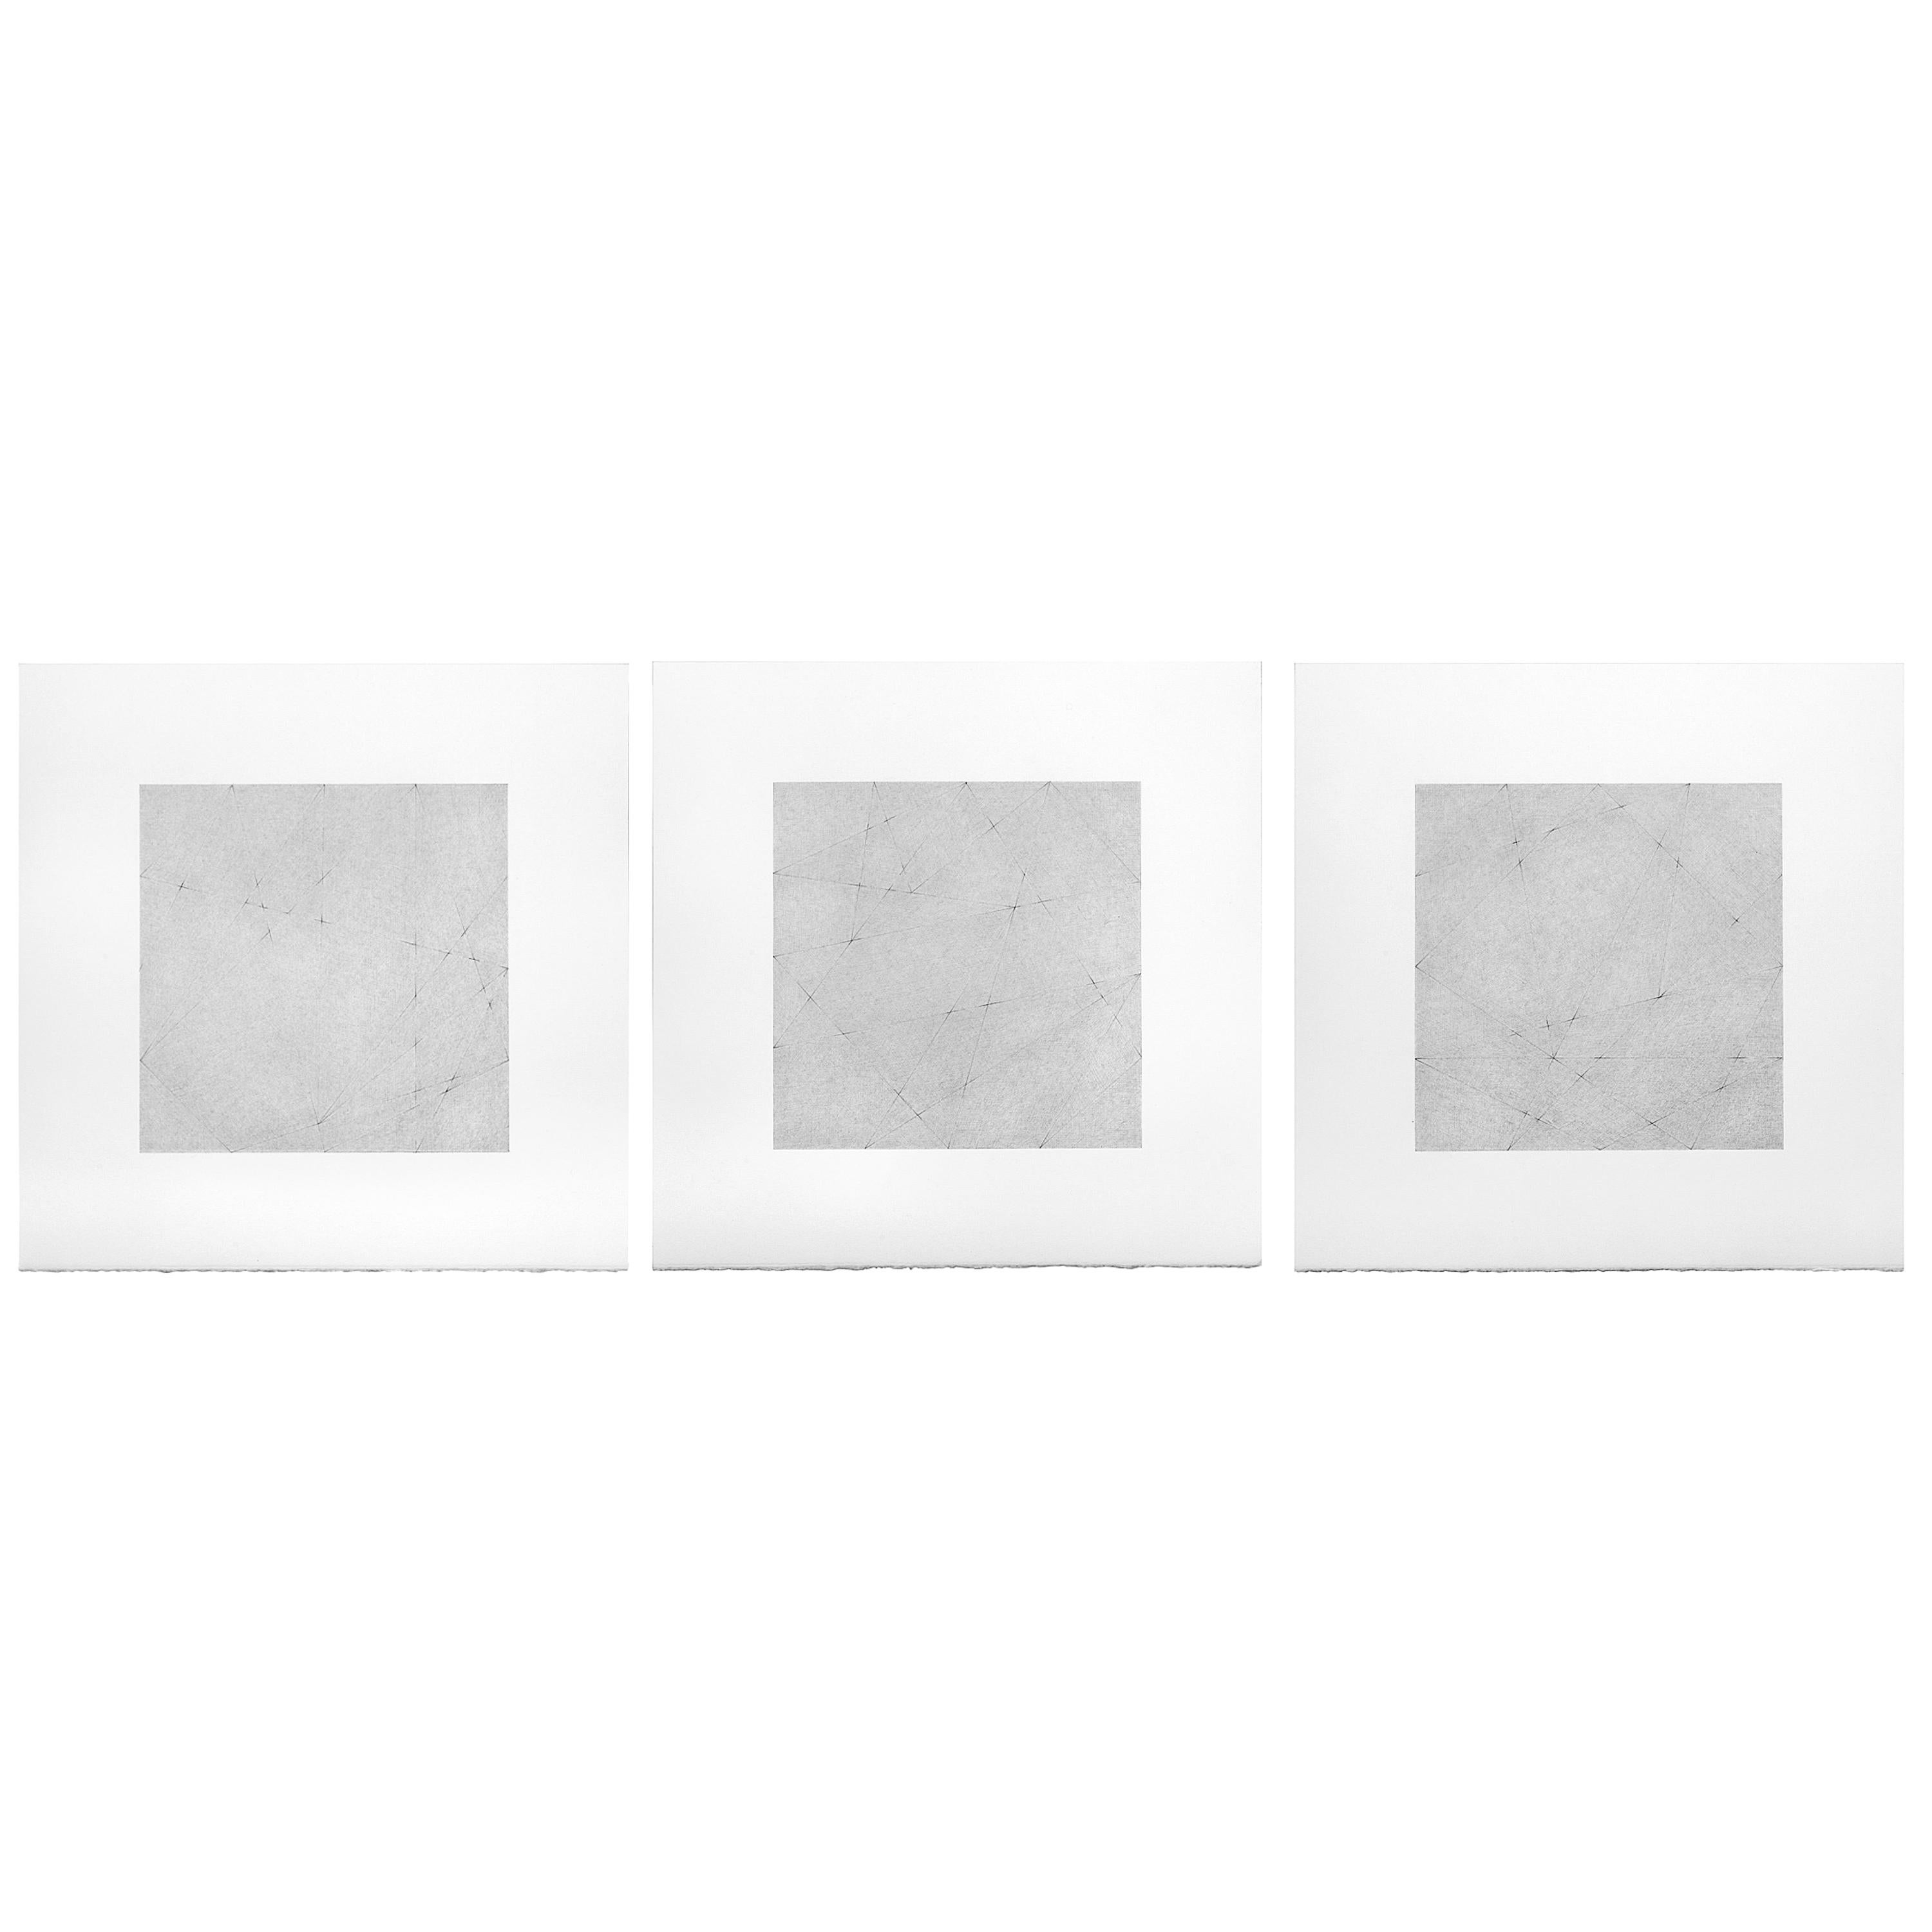 Patrick Carrara Divided Lines Triptych, Graphite on Paper, 2010 For Sale